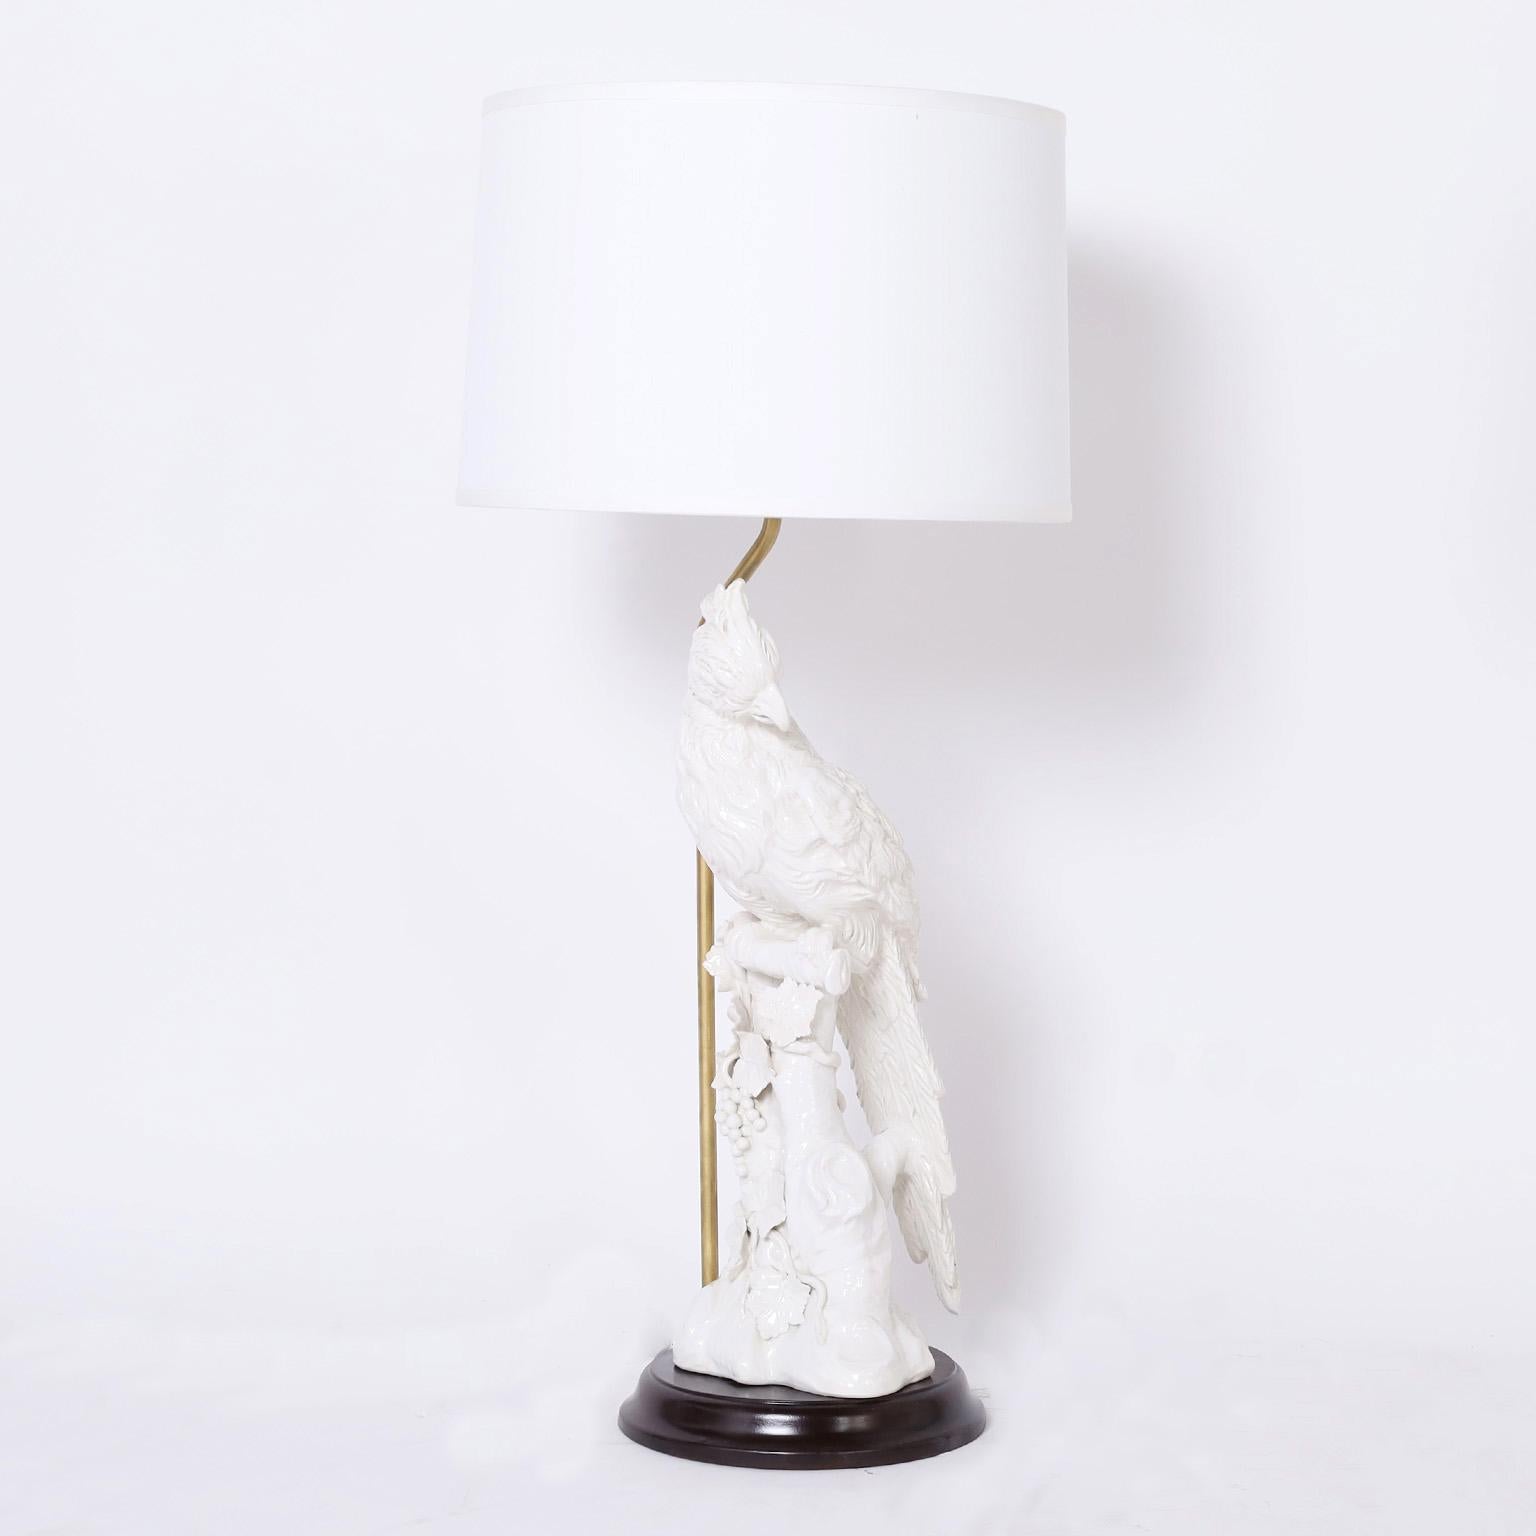 Chic pair of mid century Italian large scale table lamps crafted in earthenware with a white glaze in the form of a parrot perched on a tree and presented on an ebonized wood base.